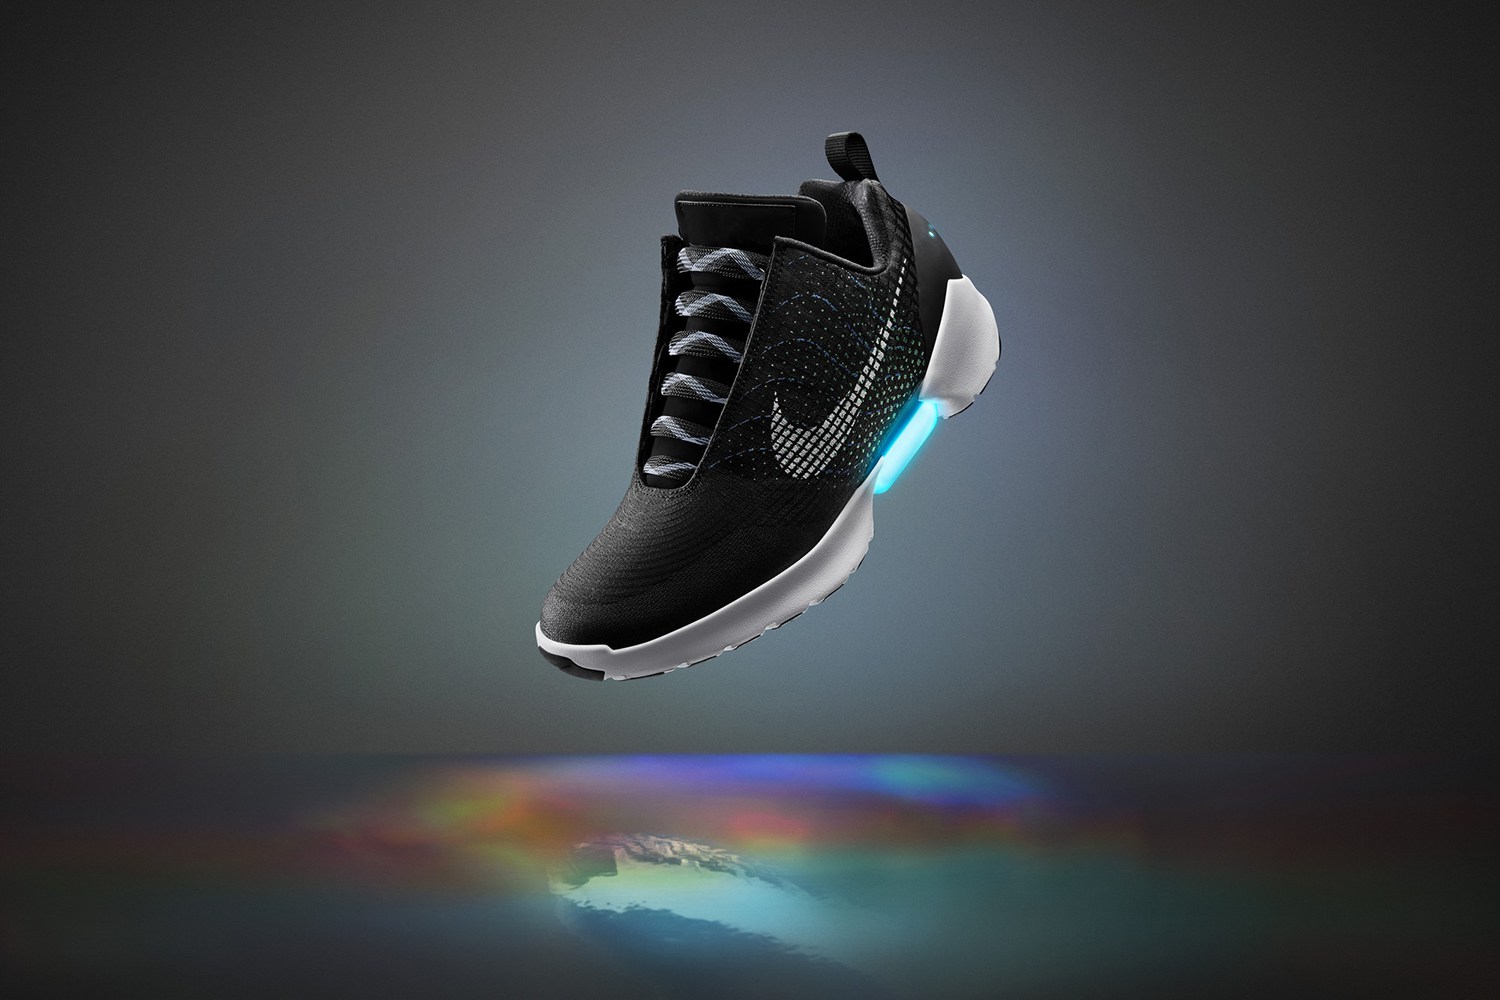 Nike’s HyperAdapt 1.0 feature Exciting New Power Laces